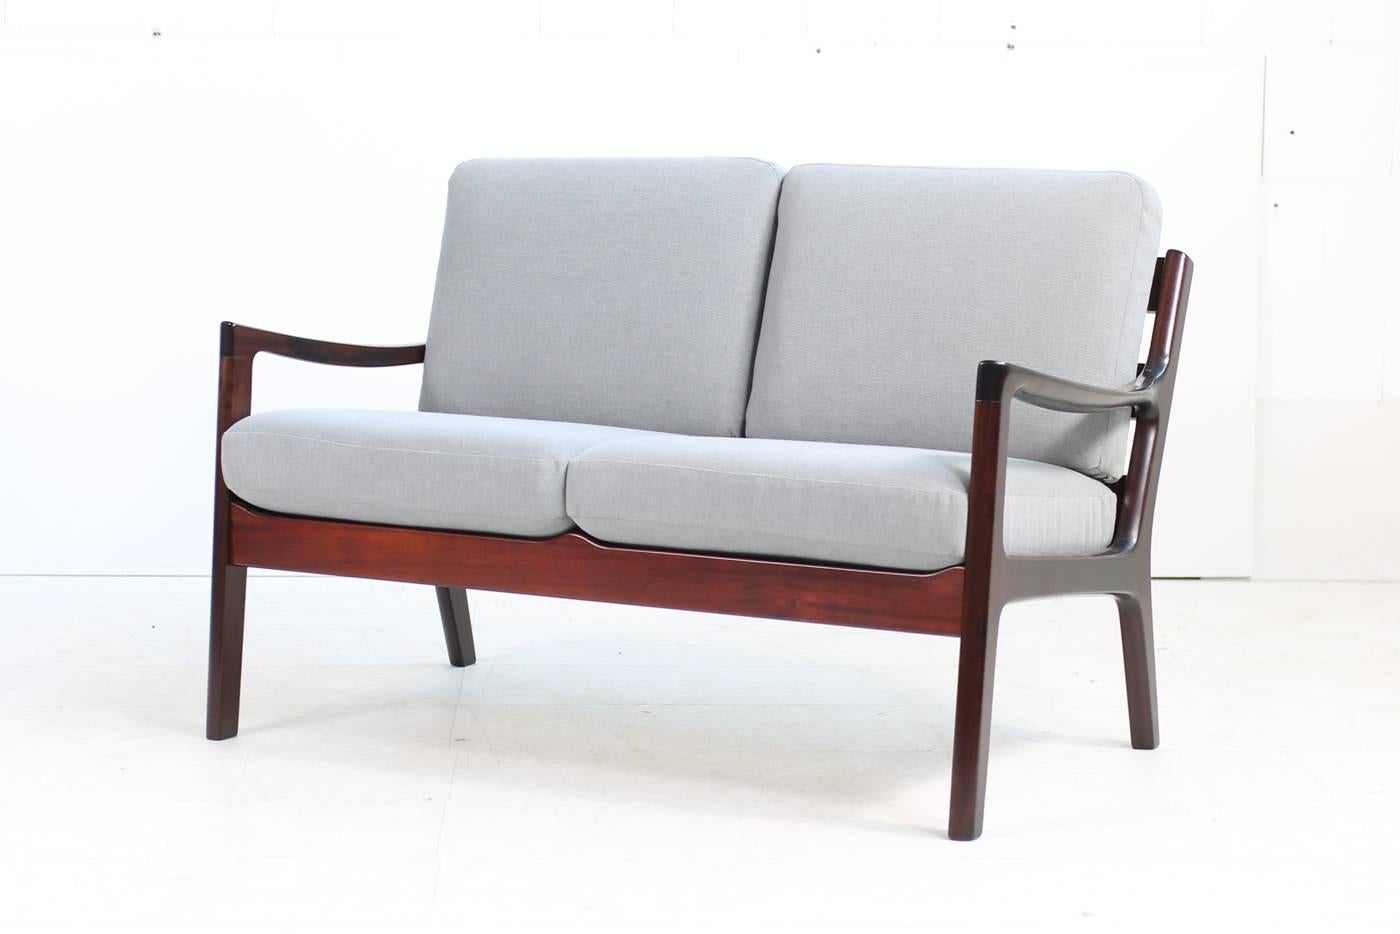 Beautiful 1960s, Ole Wanscher sofa, P.J. Denmark made of mahogany, new upholstery and covered with new high quality cotton fabric in light grey, matching easy chair and three-seat sofa available, please visit our 1stdibs storefront. Some sun fading